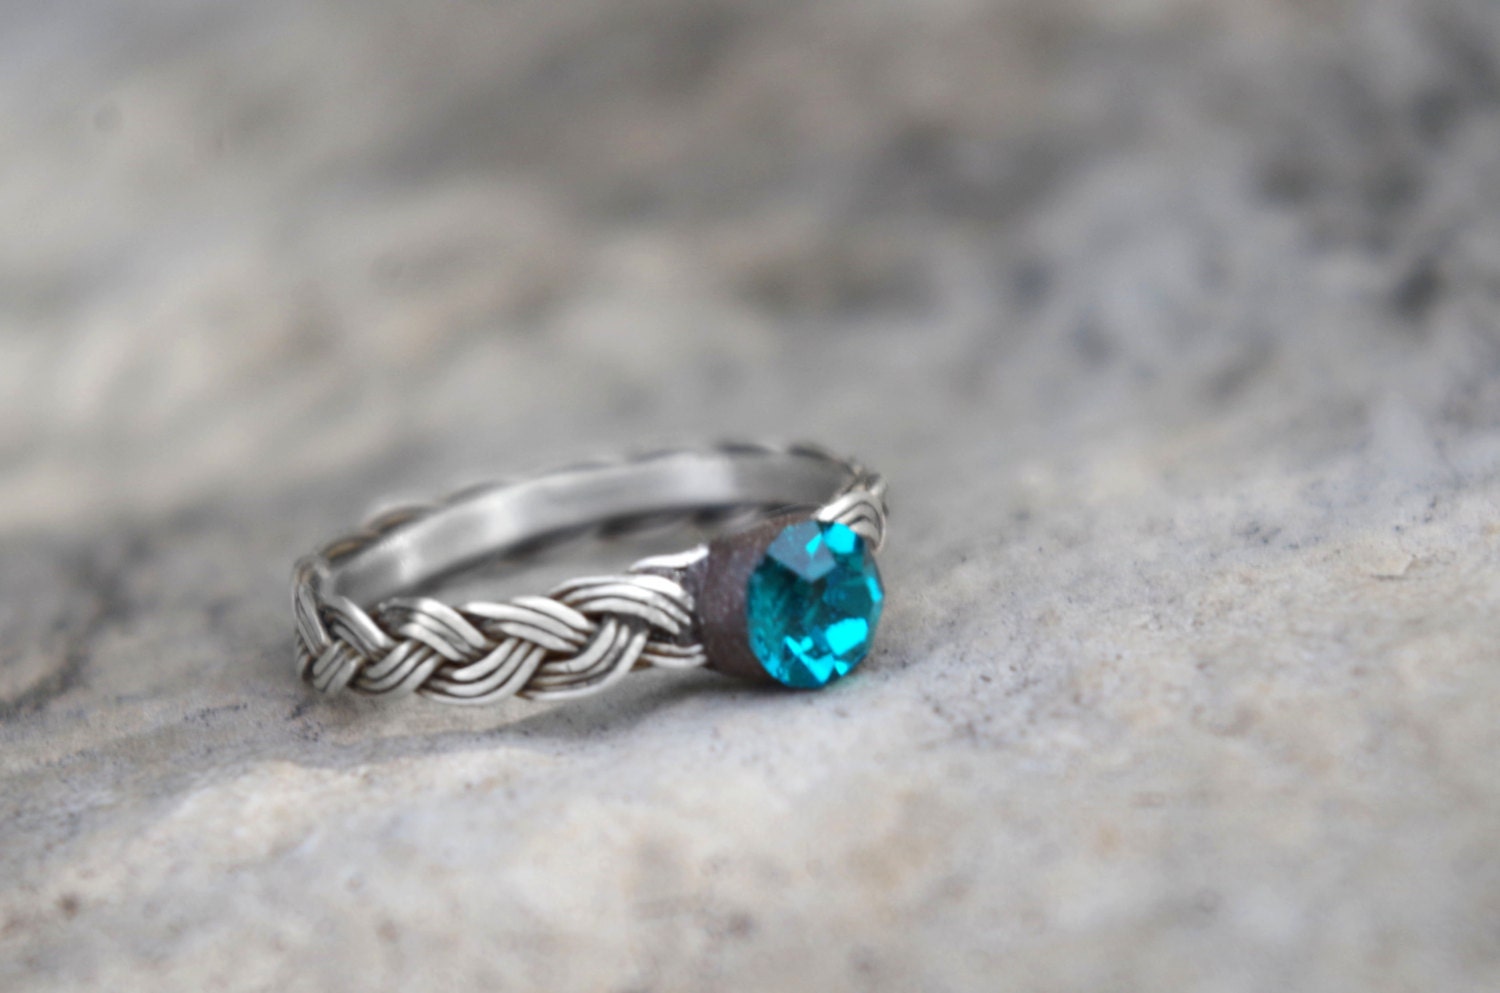 Pendragon Braided Silver Ring Teal Stone Size 6